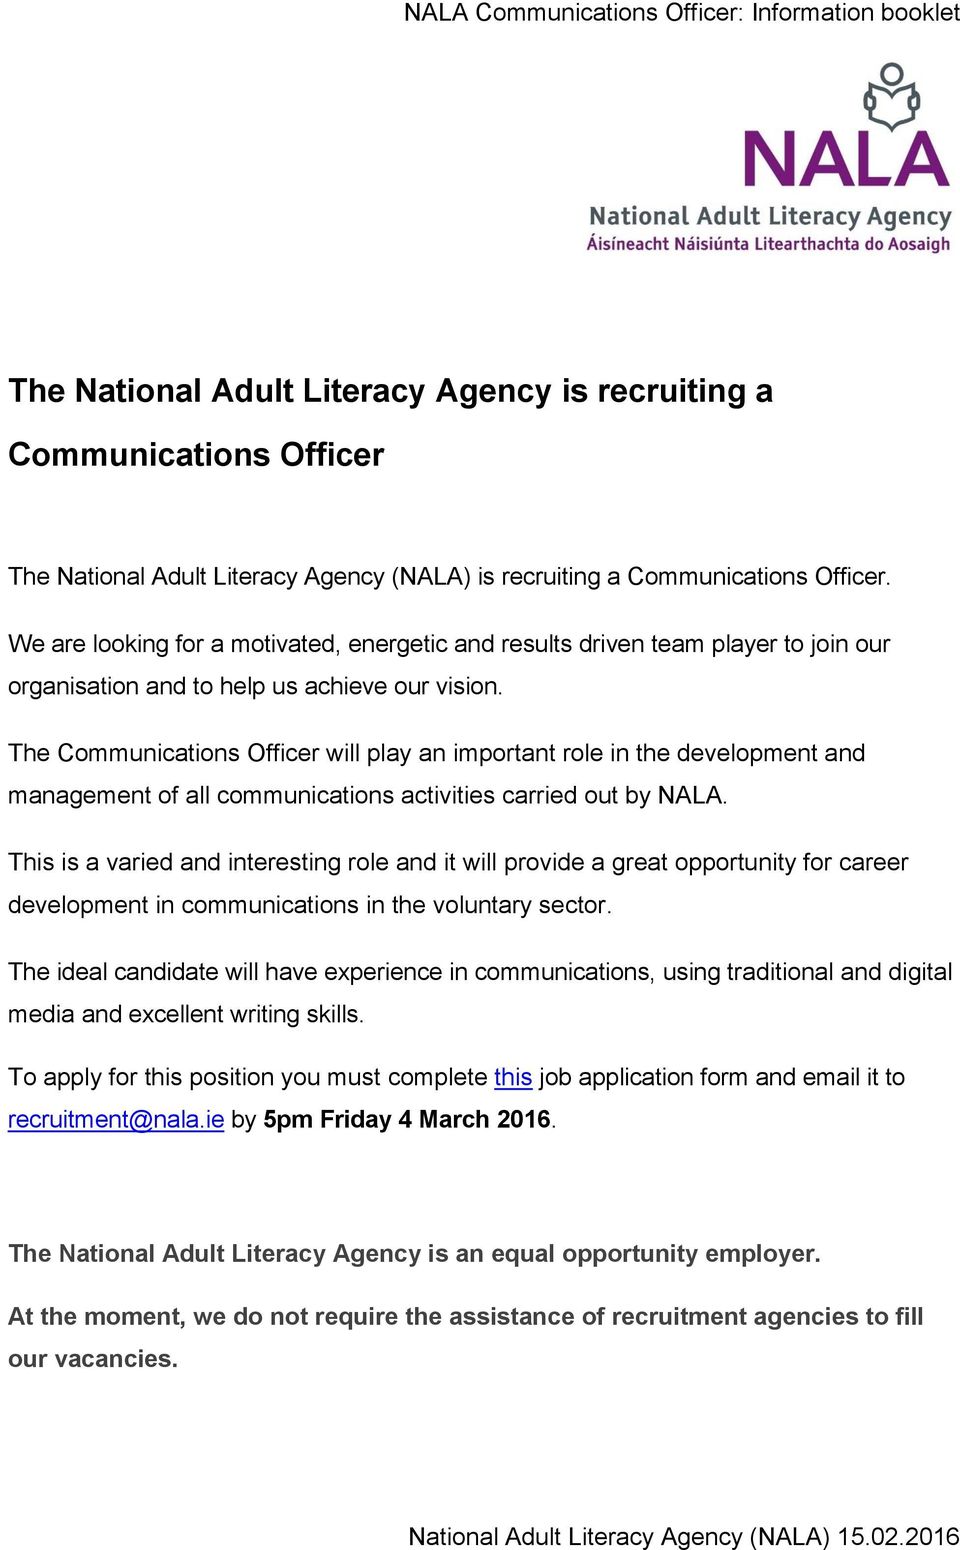 The Communications Officer will play an important role in the development and management of all communications activities carried out by NALA.